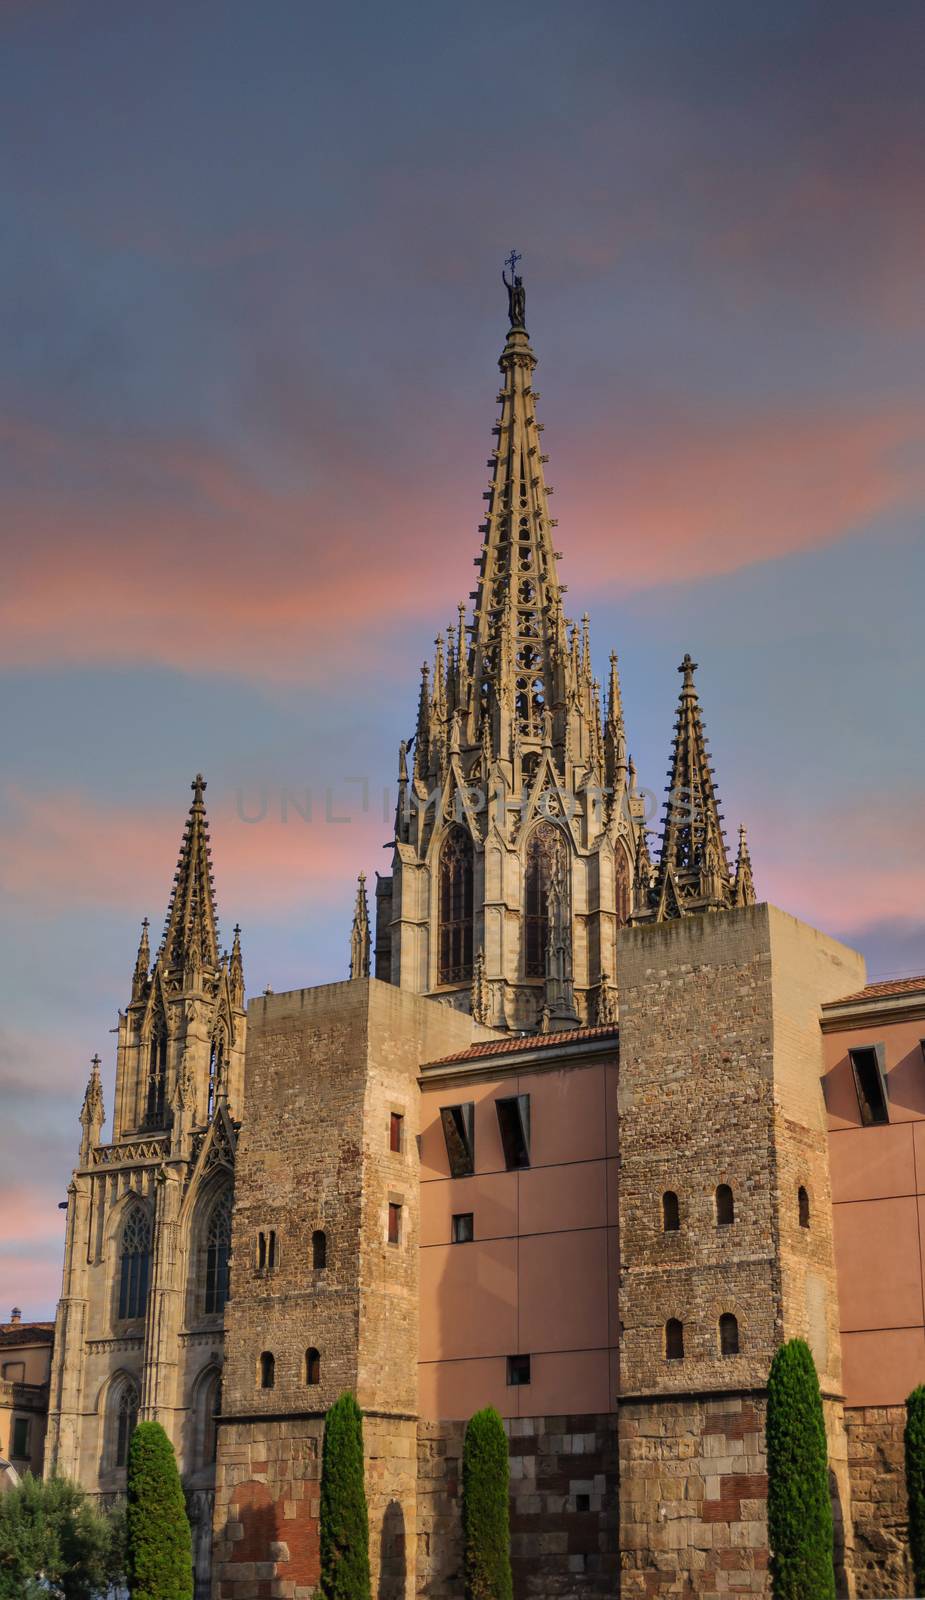 Steeples on Old Barcelona Cathedral by dbvirago